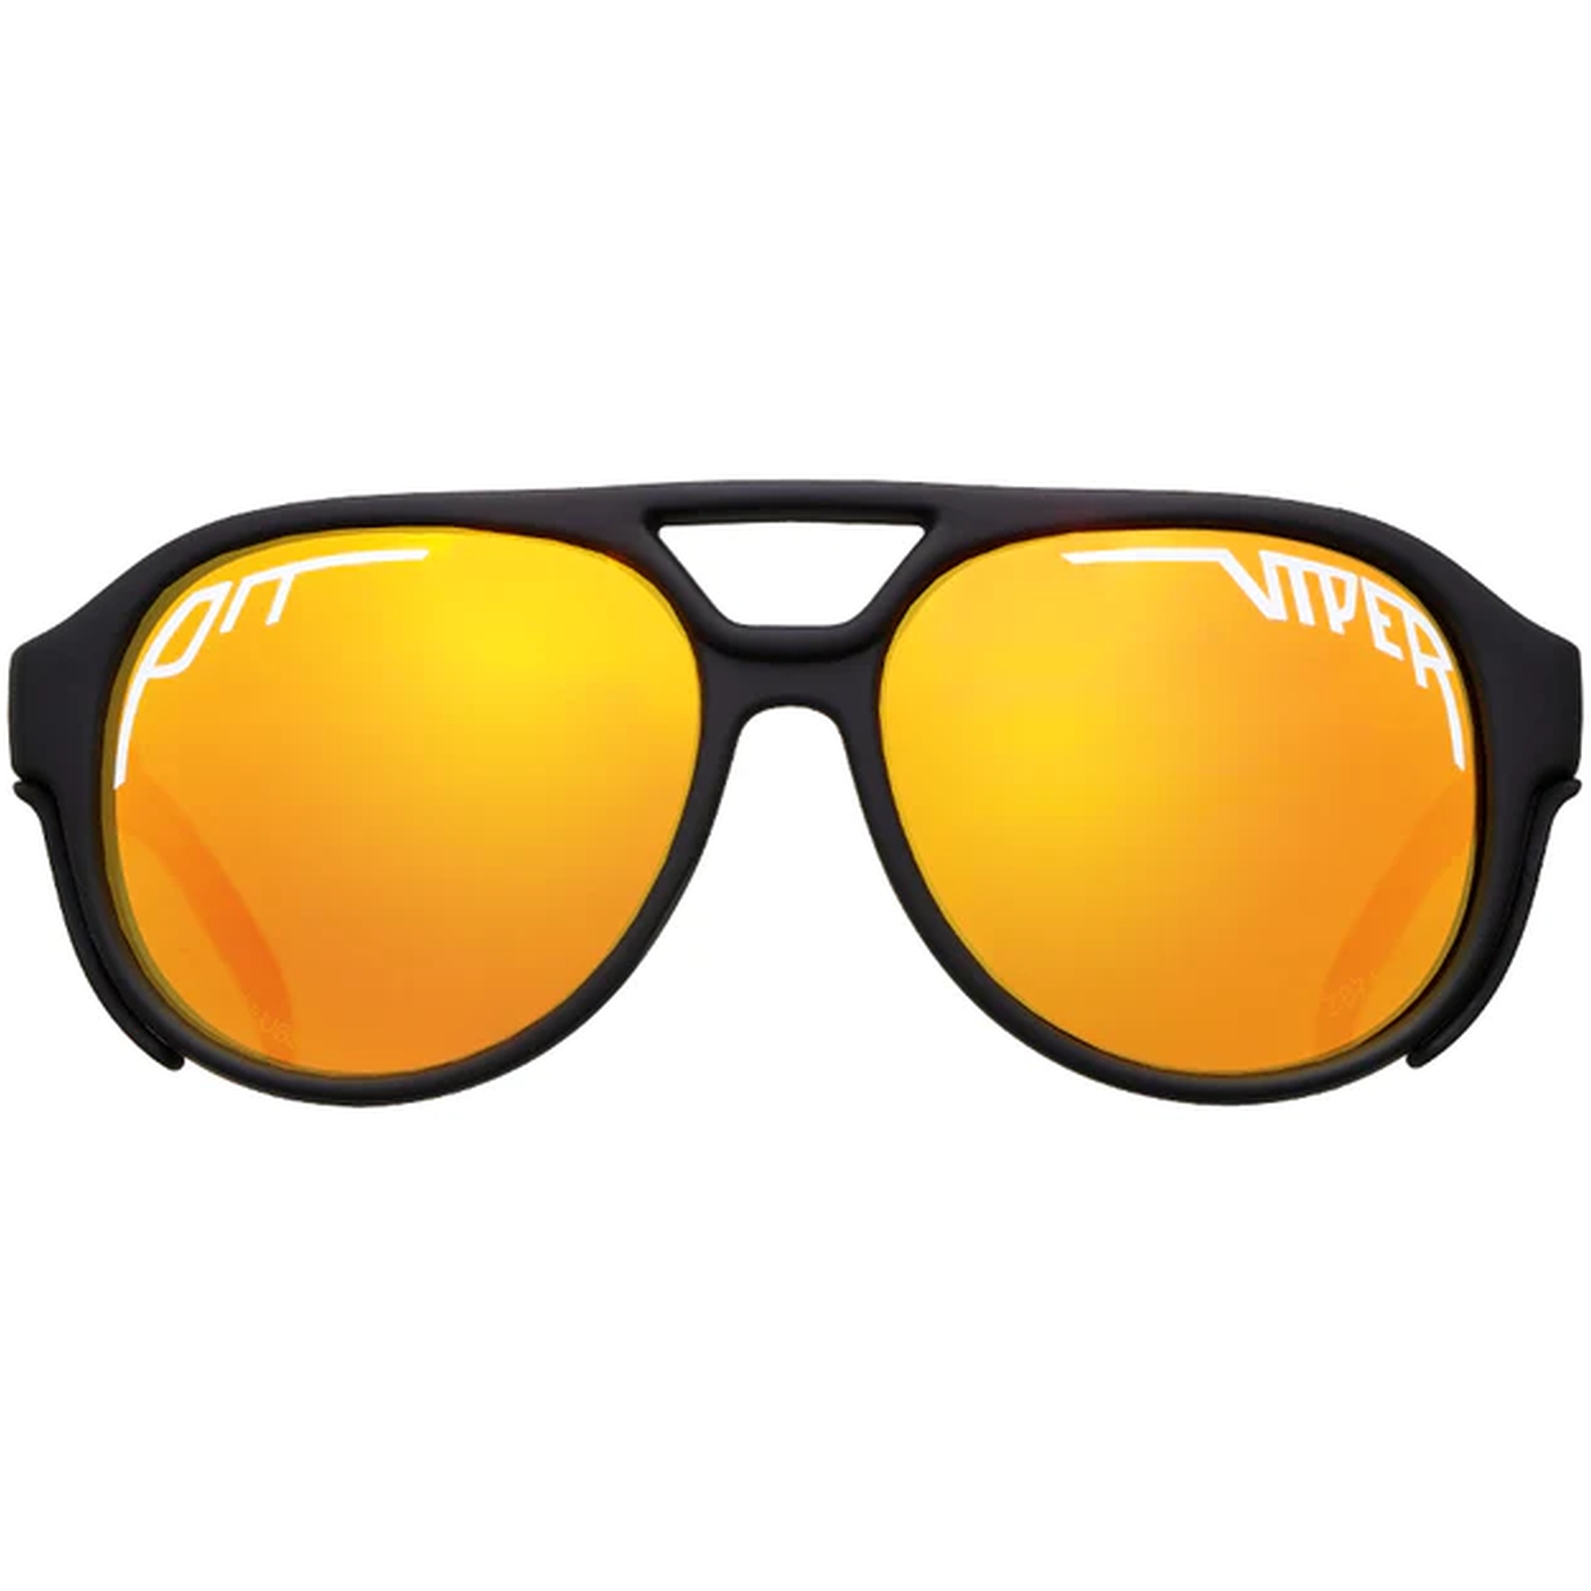 Productfoto van Pit Viper The Exciters Glasses - The Rubbers